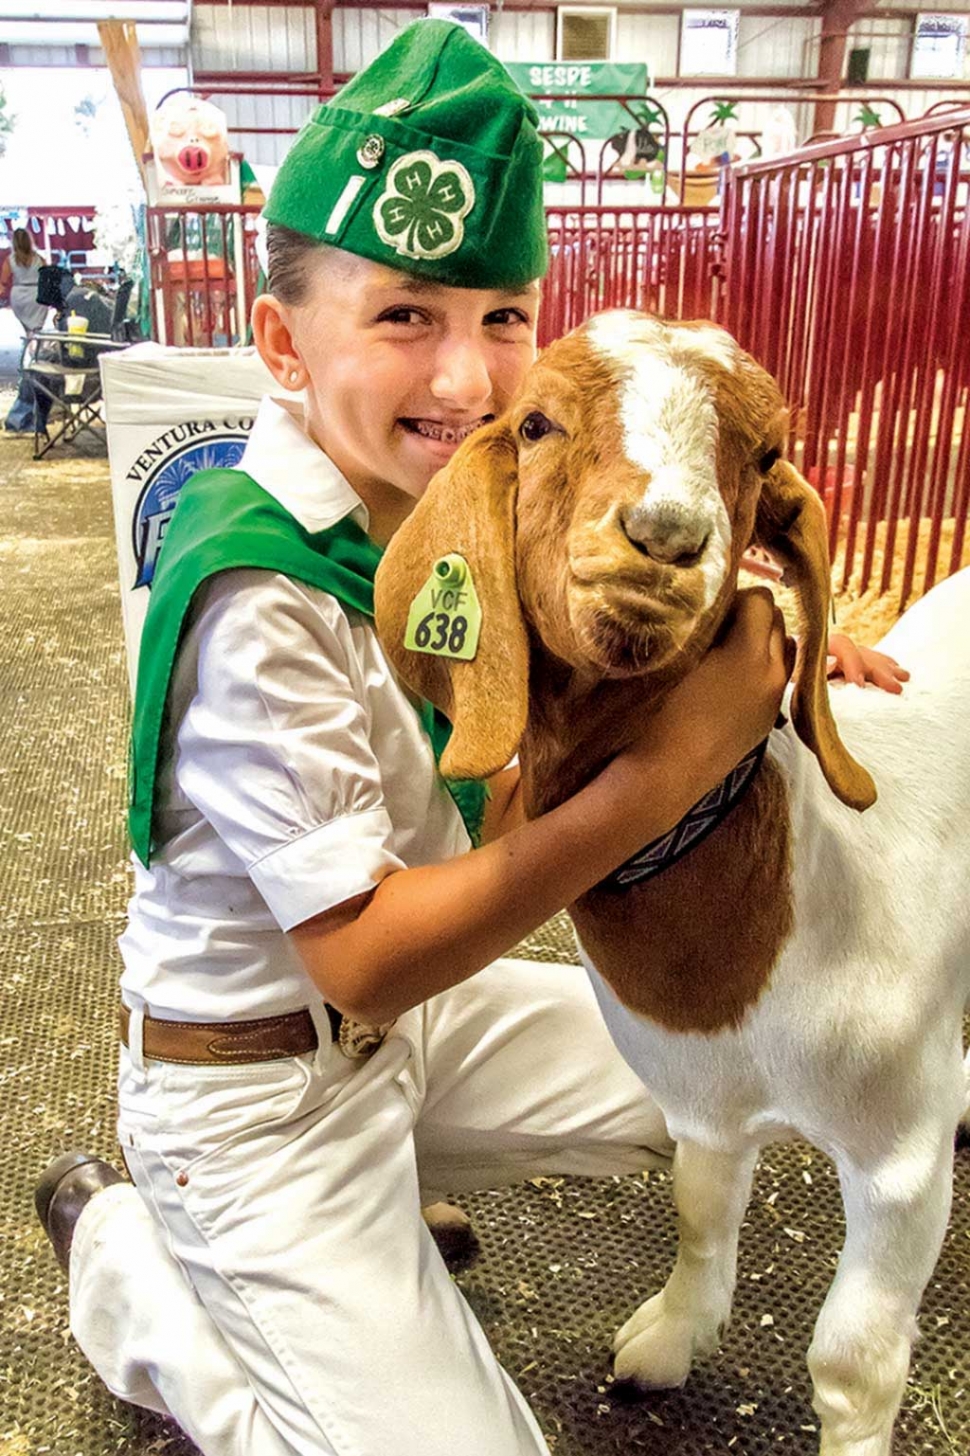 AUGUST - Twelve year old Brooke Allen and “Sophie” won Grand Champion, 4-H Champion and earned $1,900 at this past years Ventura County Fair. Photos by Bob Crum.